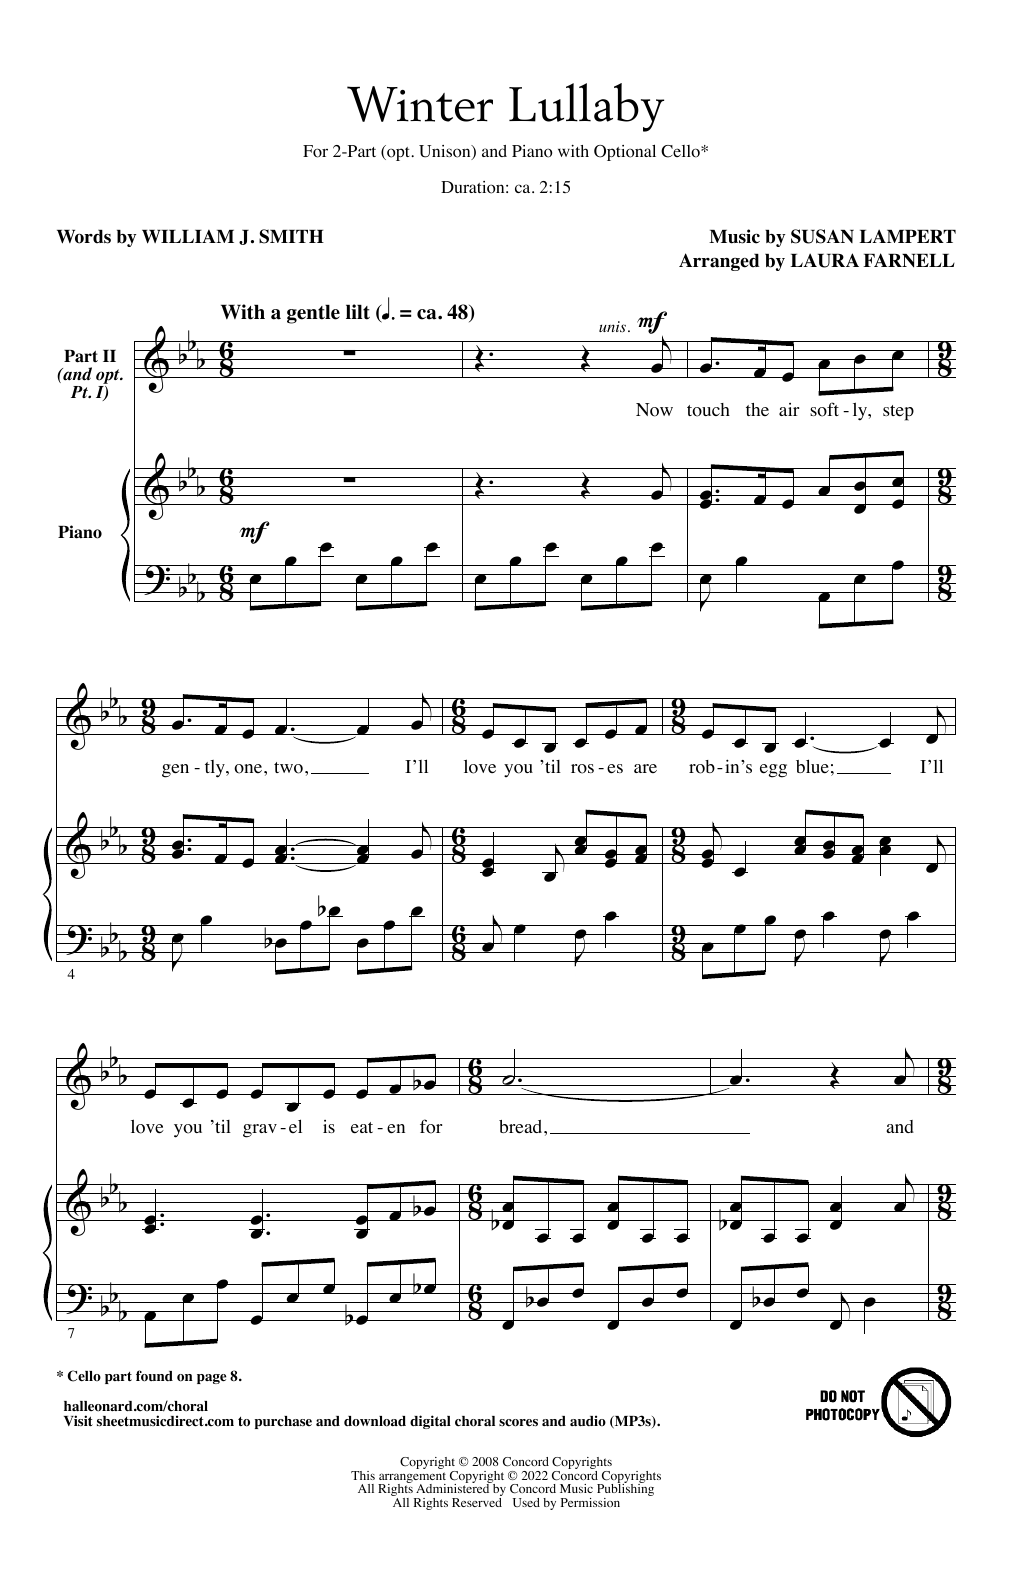 Download William J. Smith and Susan Lampert Winter Lullaby (arr. Laura Farnell) Sheet Music